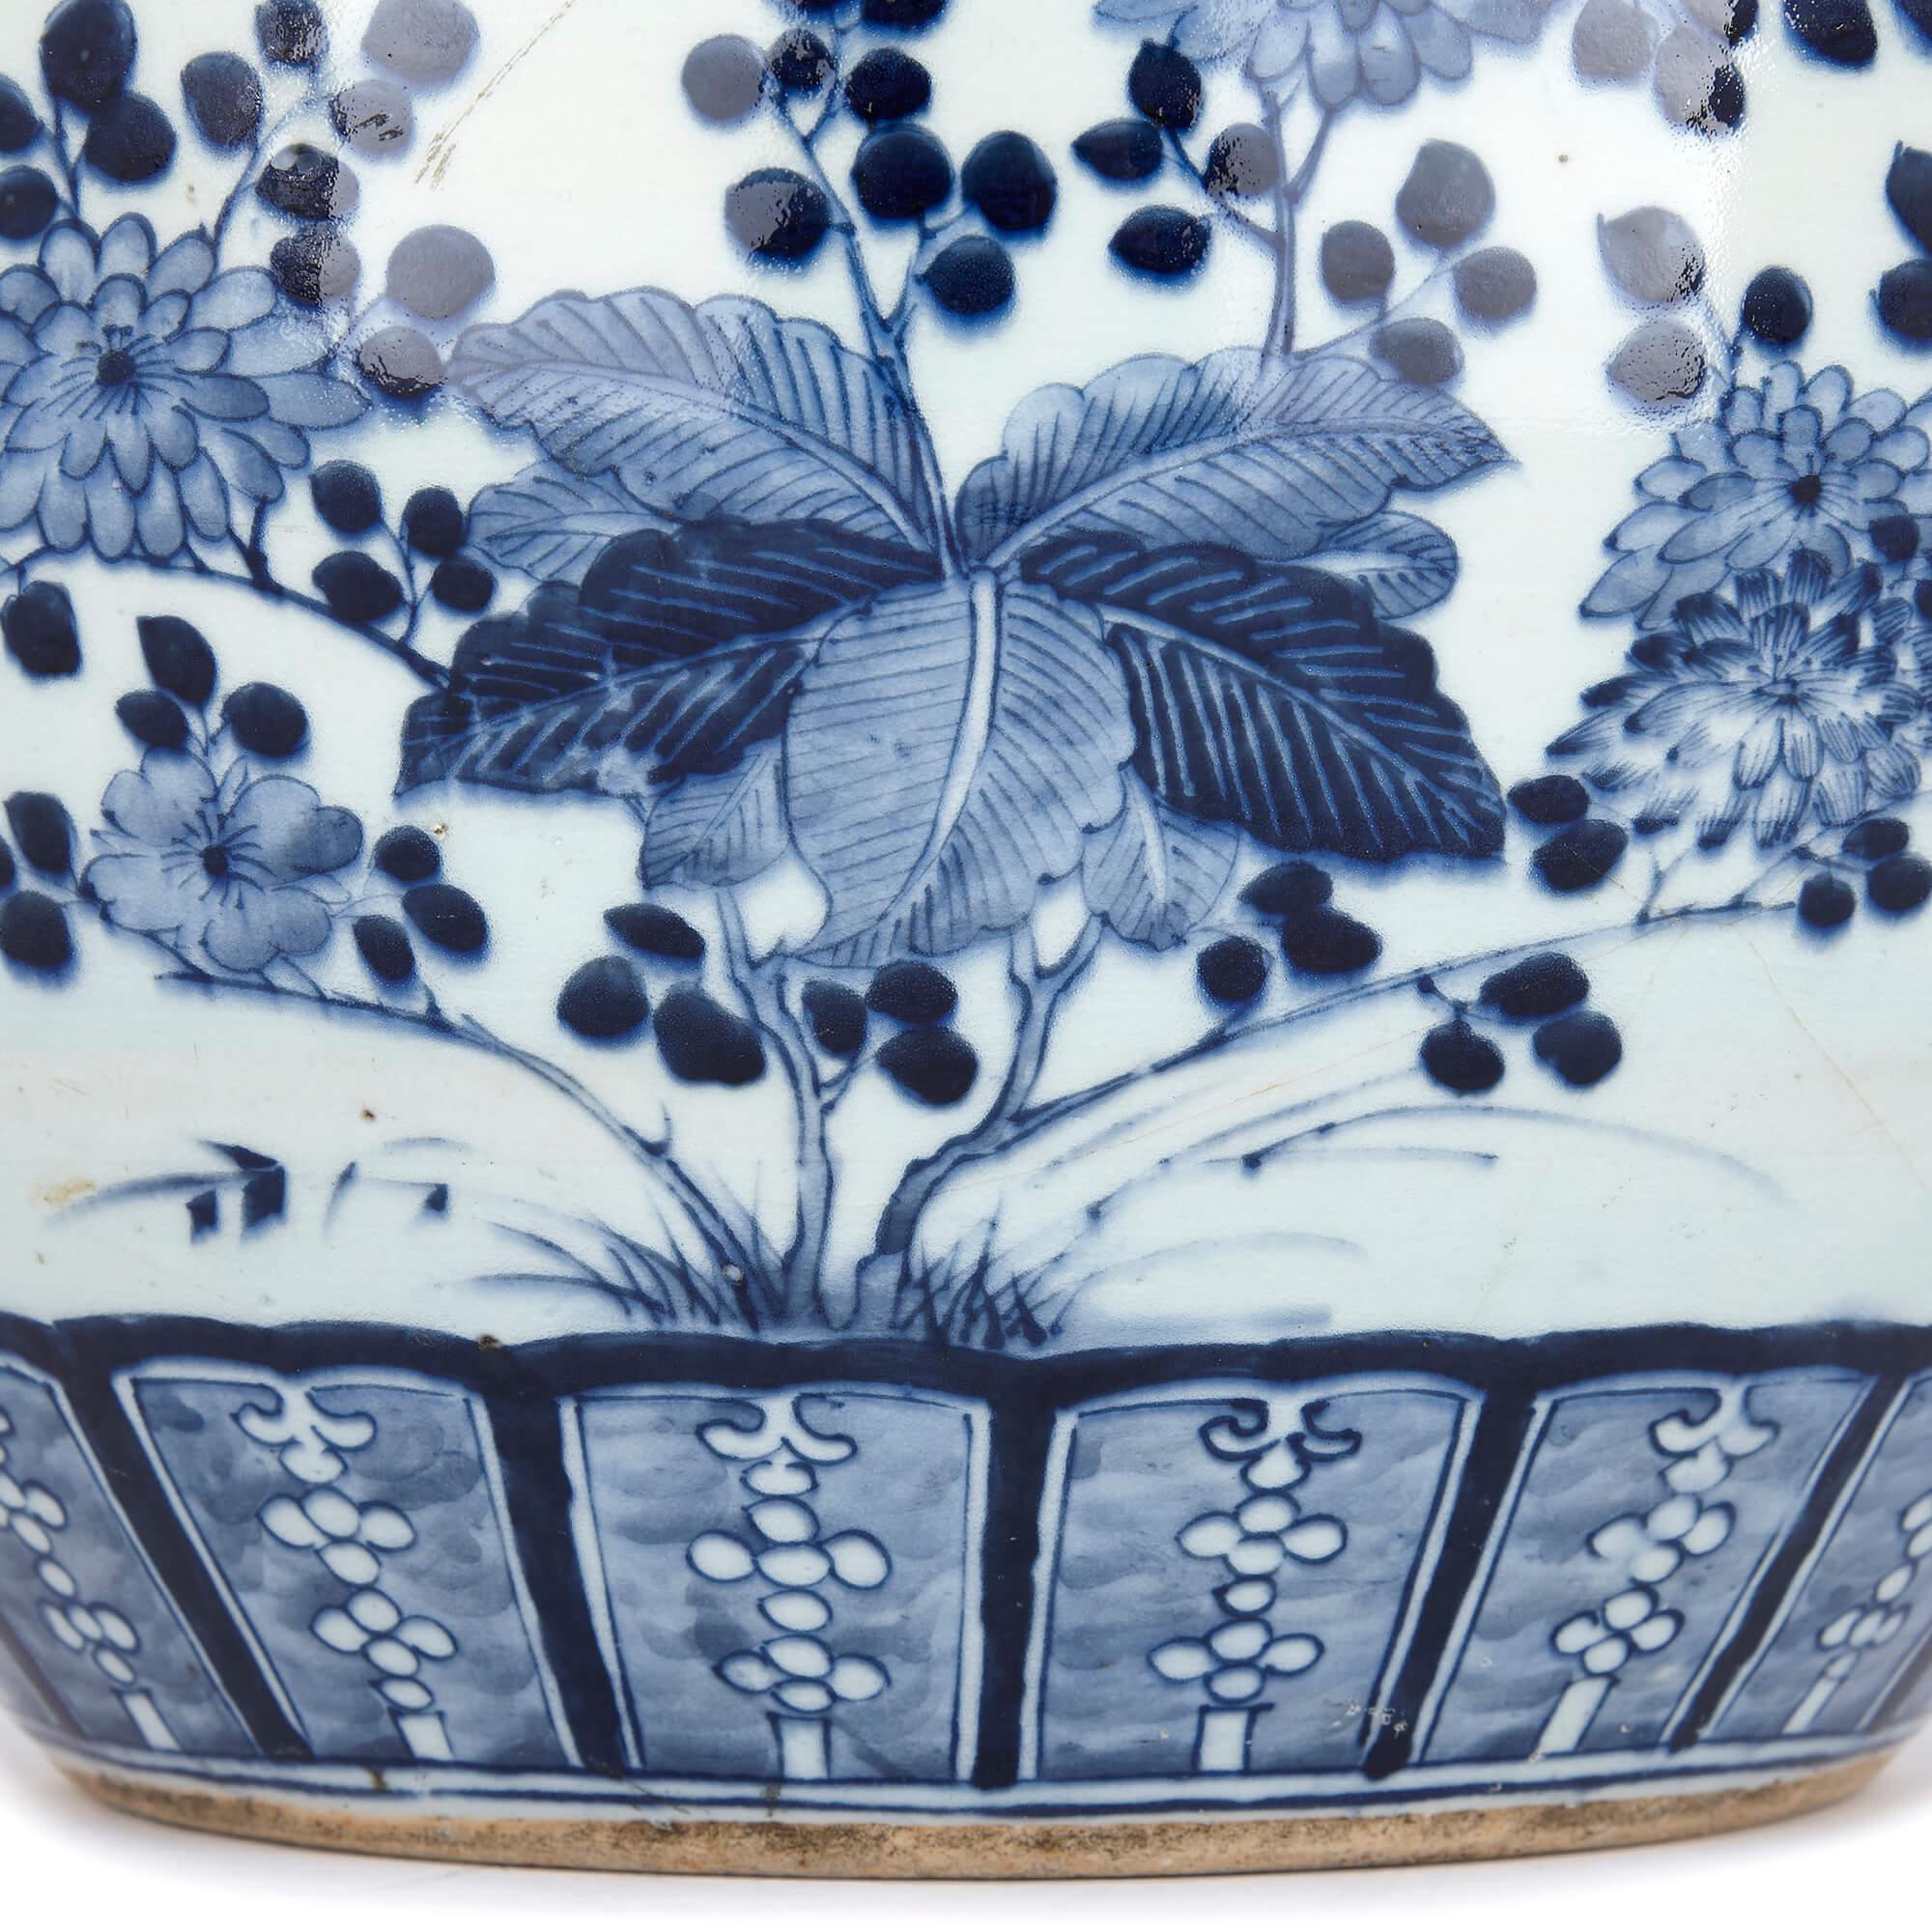 20th Century Chinese Blue and White Antique Ceramic Jardiniere with Floral Designs